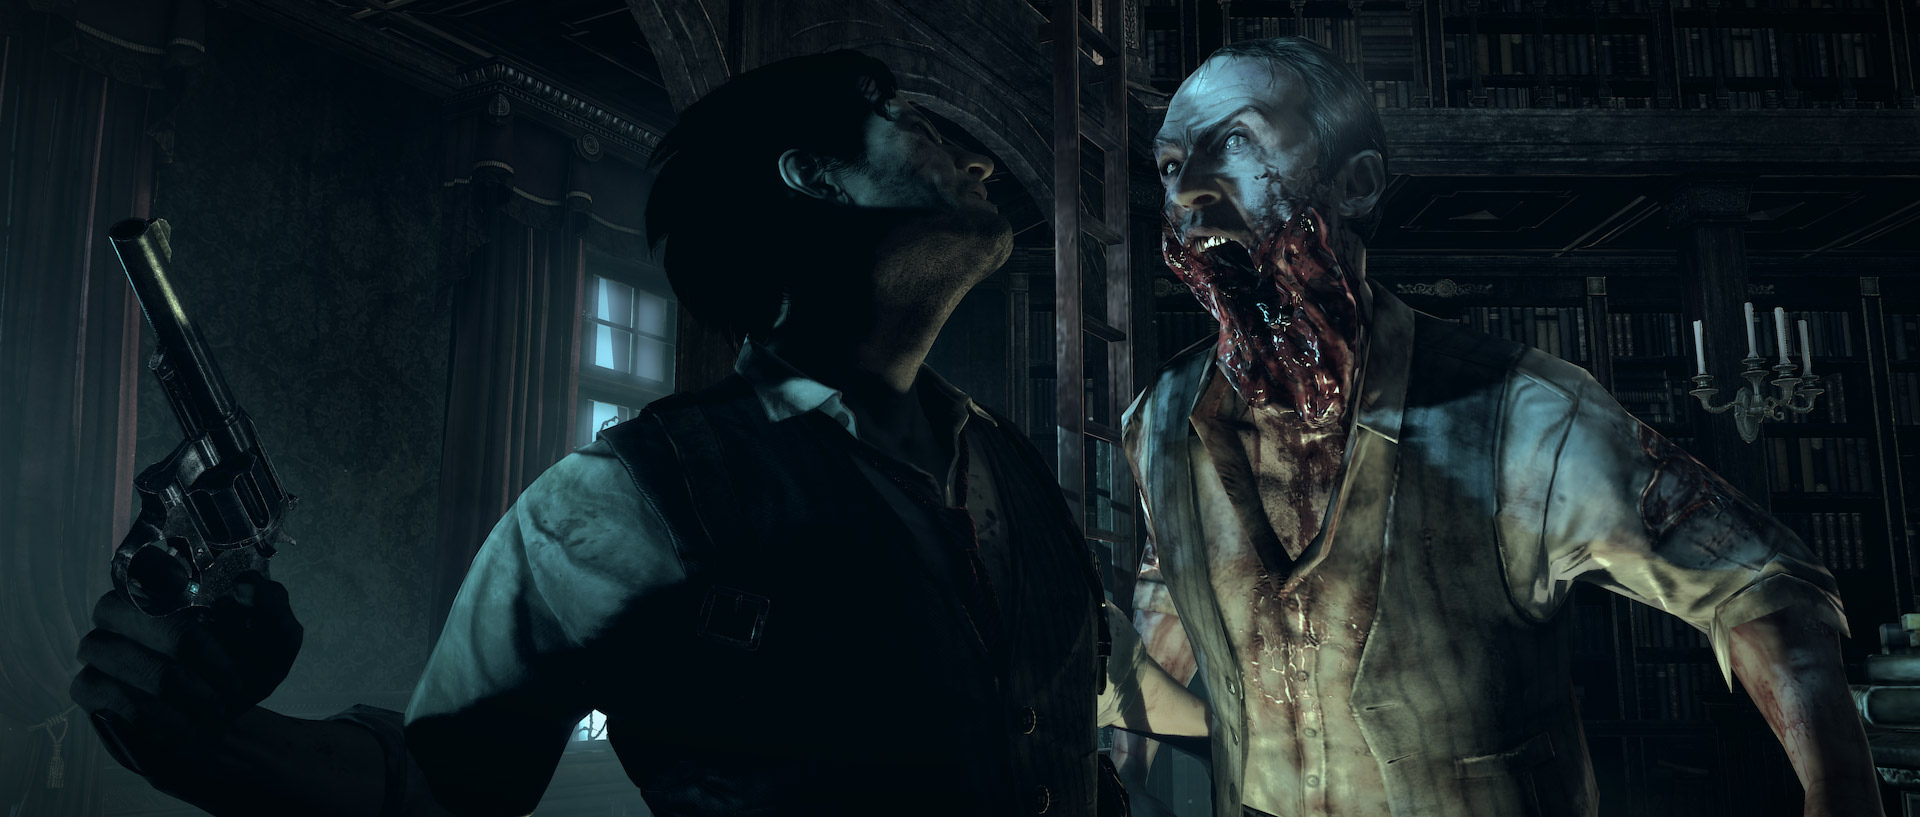 The Evil Within Will Have a Season Pass, Three Pieces of Add-On Content